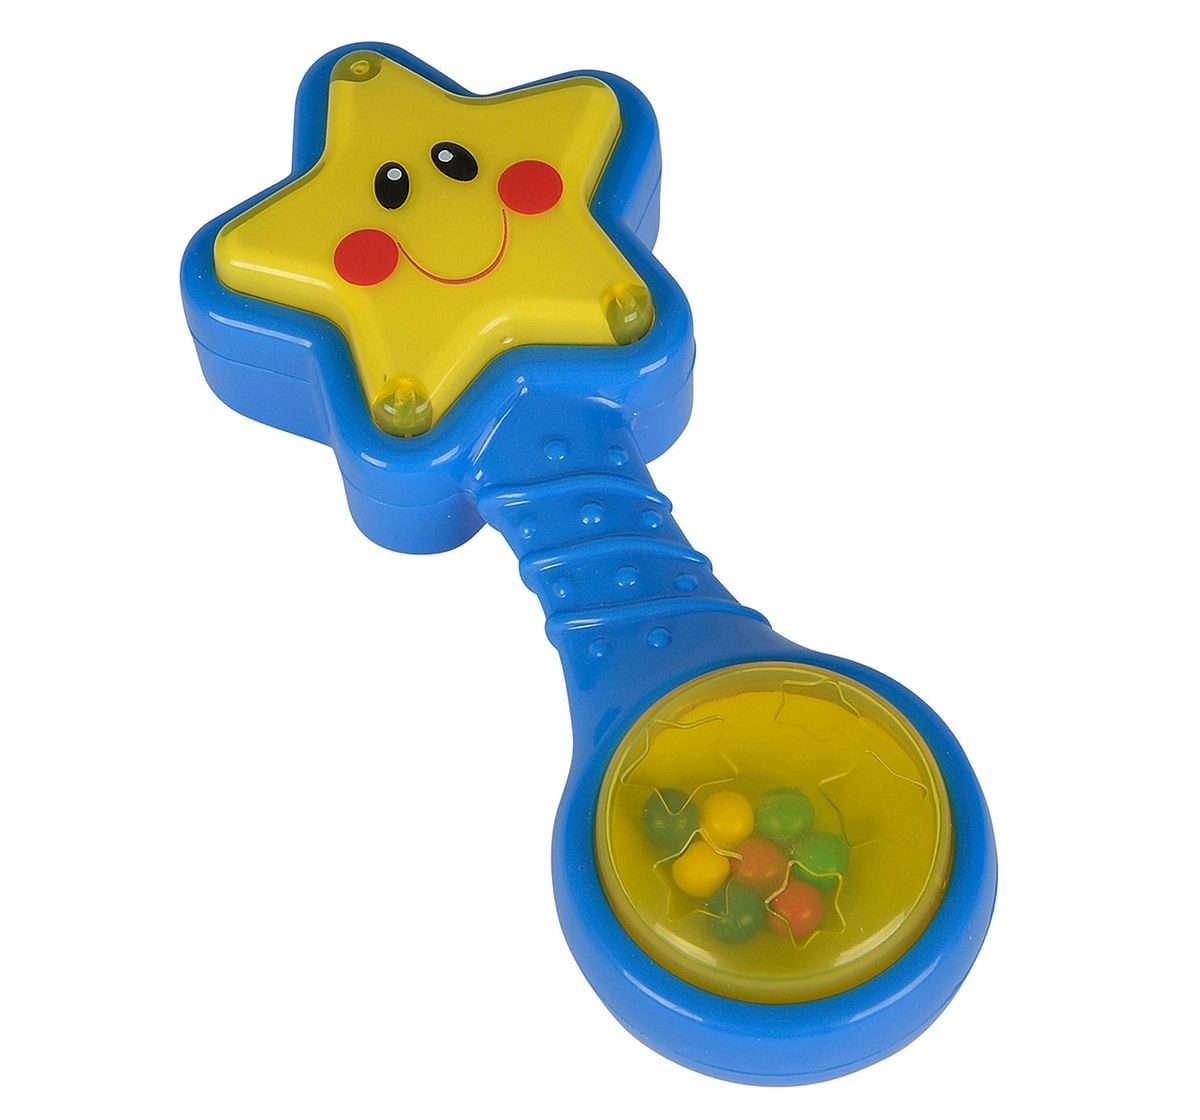 Simba Abc Star Rattle With Light,  0M+ (Blue)